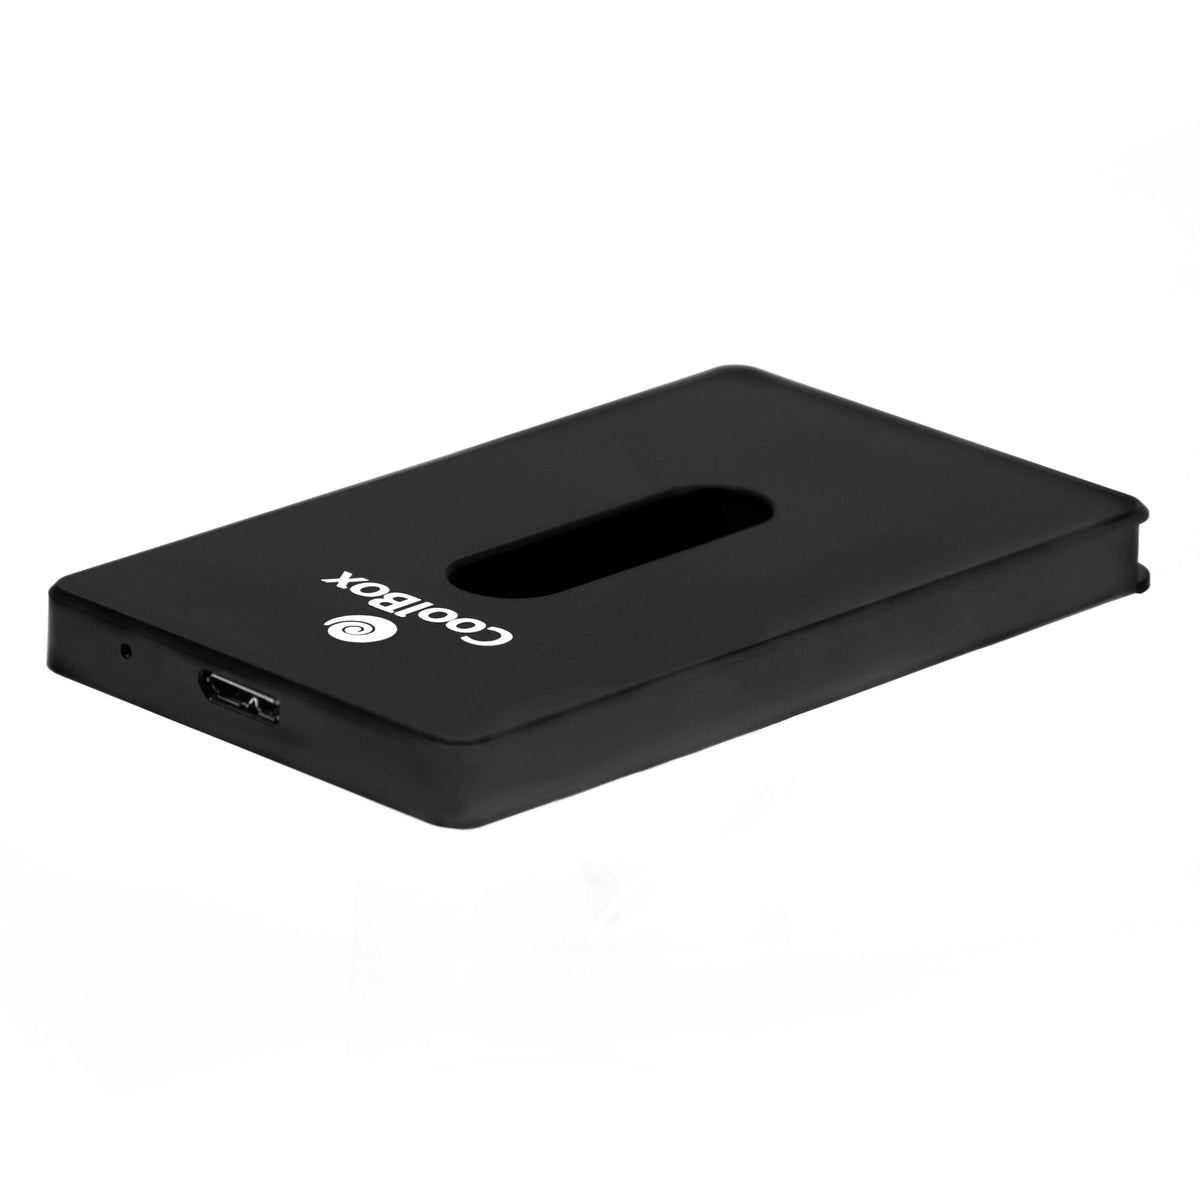 Box for external disk 2.5 7mm CoolBox S-2533 SLOT-IN USB 3.0 Black